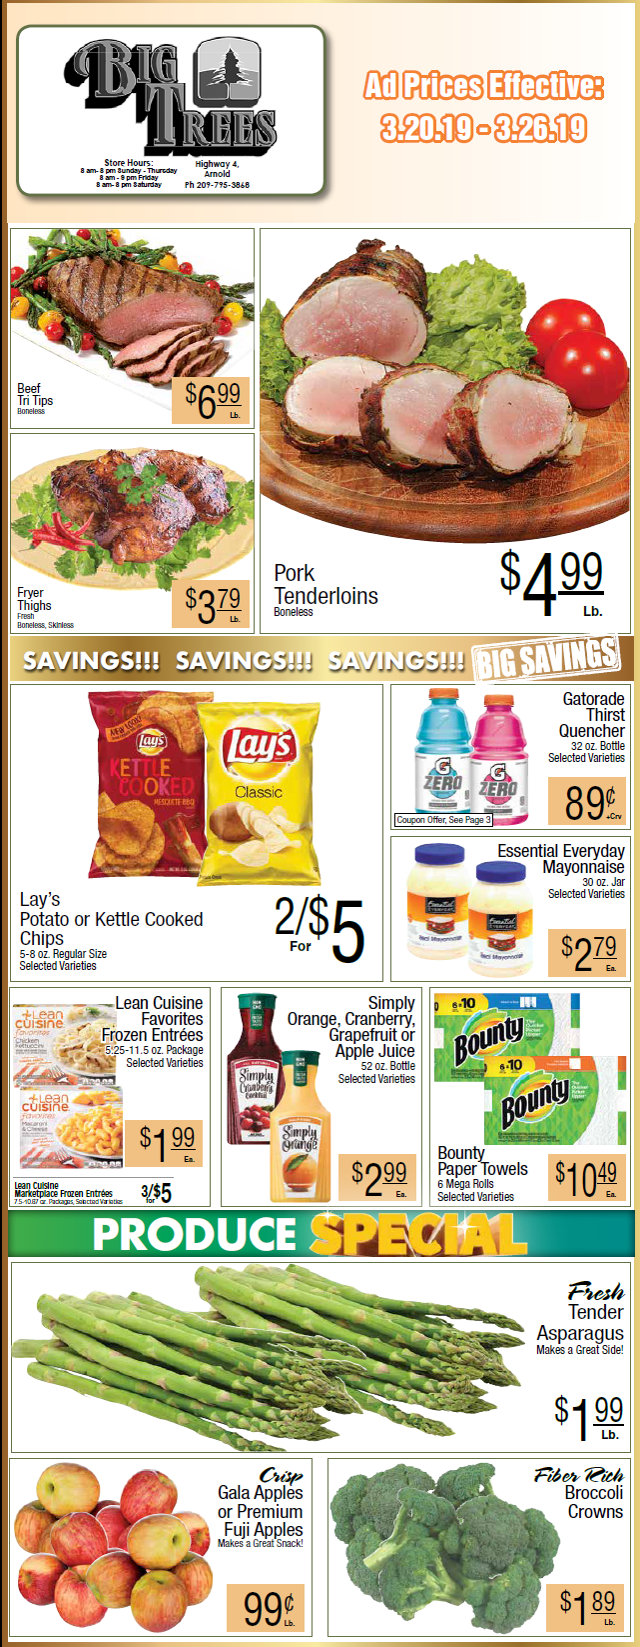 Big Trees Market Weekly Ad & Grocery Specials Through March 26th